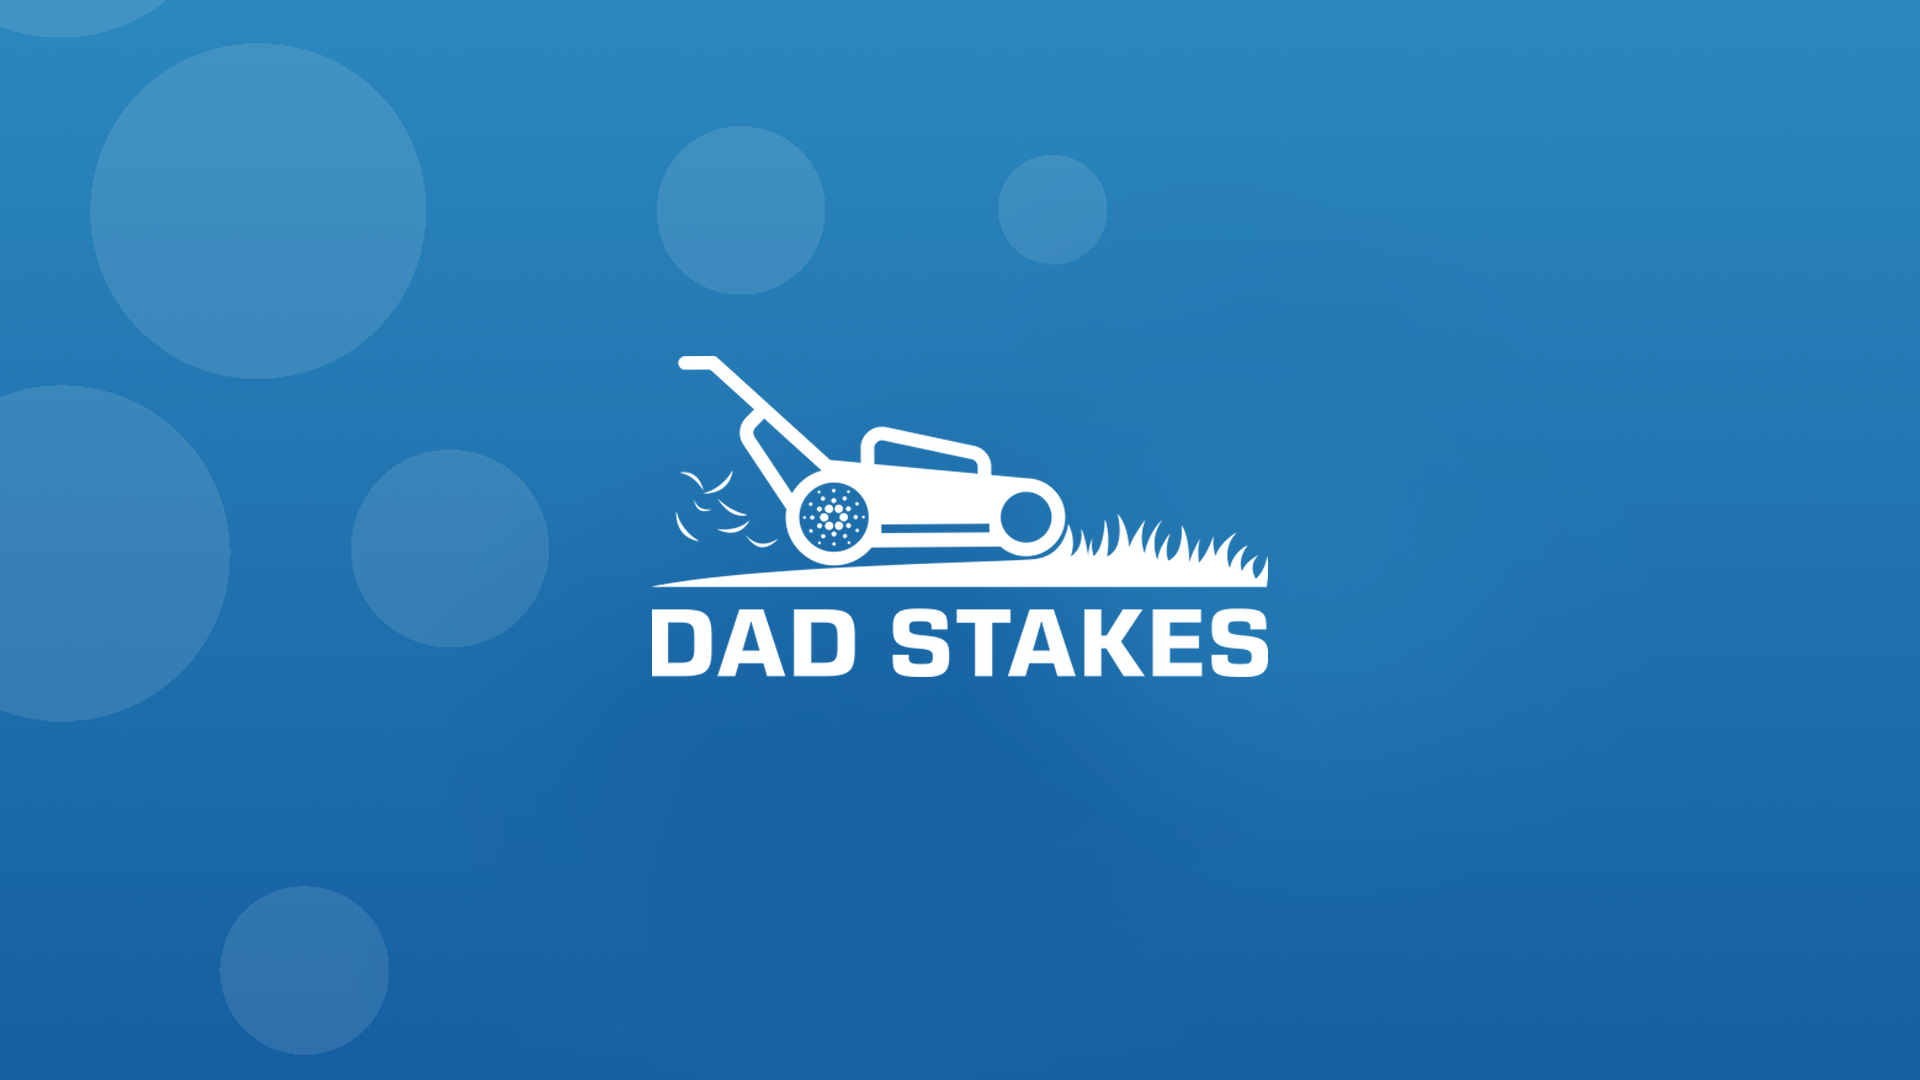 Dad Stakes